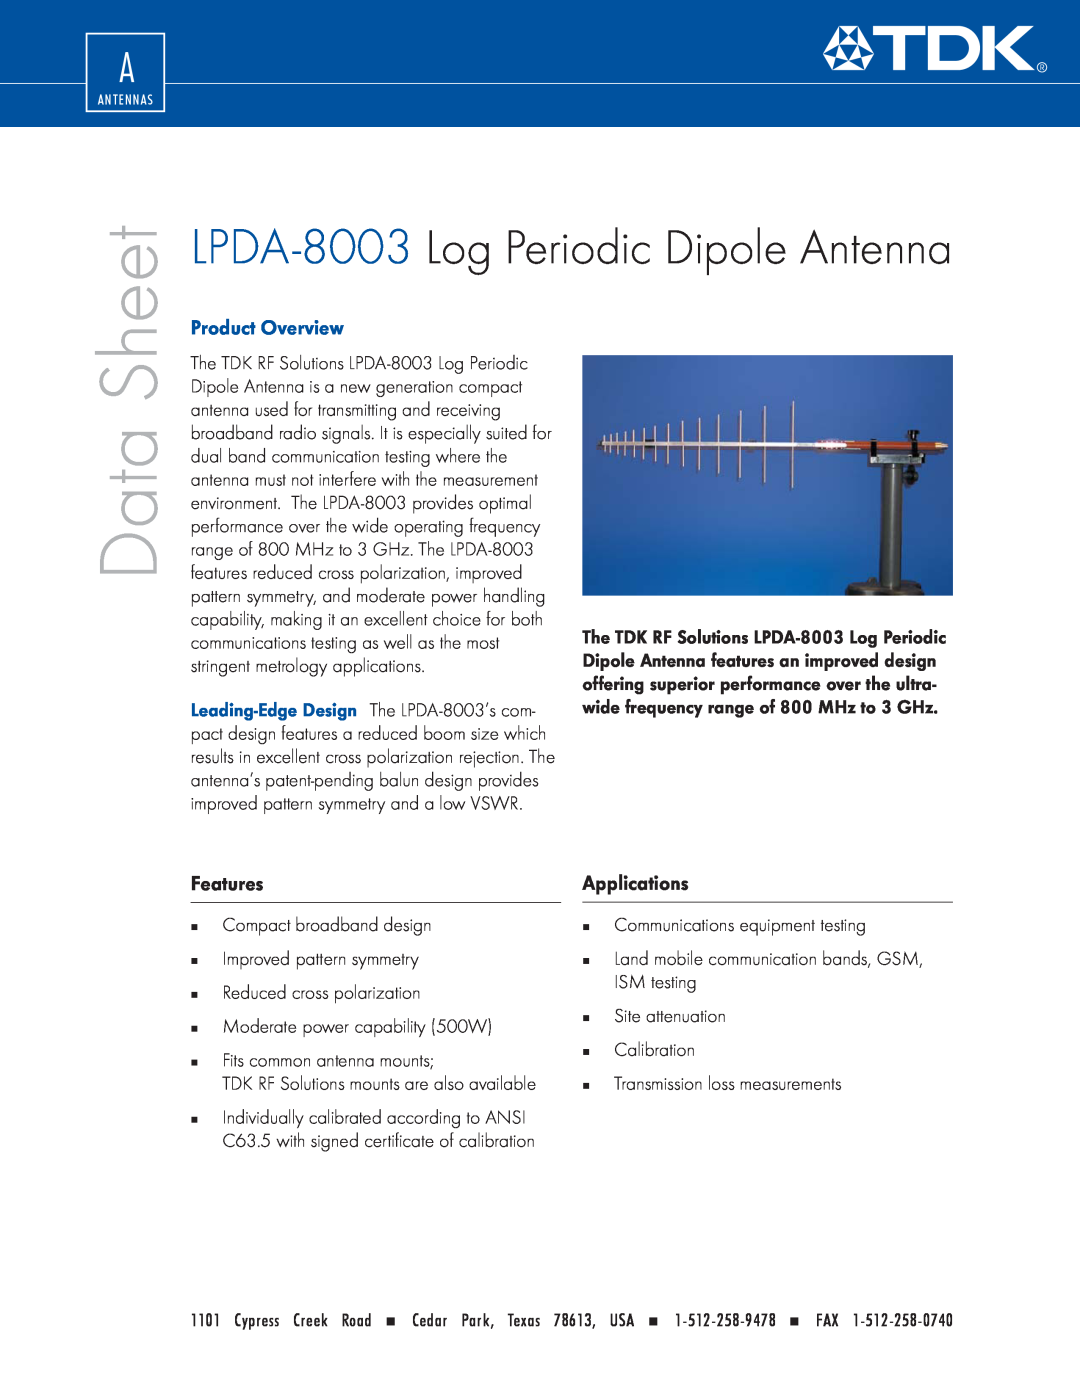 TDK manual LPDA-8003 Log Periodic Dipole Antenna, Features, Applications, Data, Sheet, Product Overview 